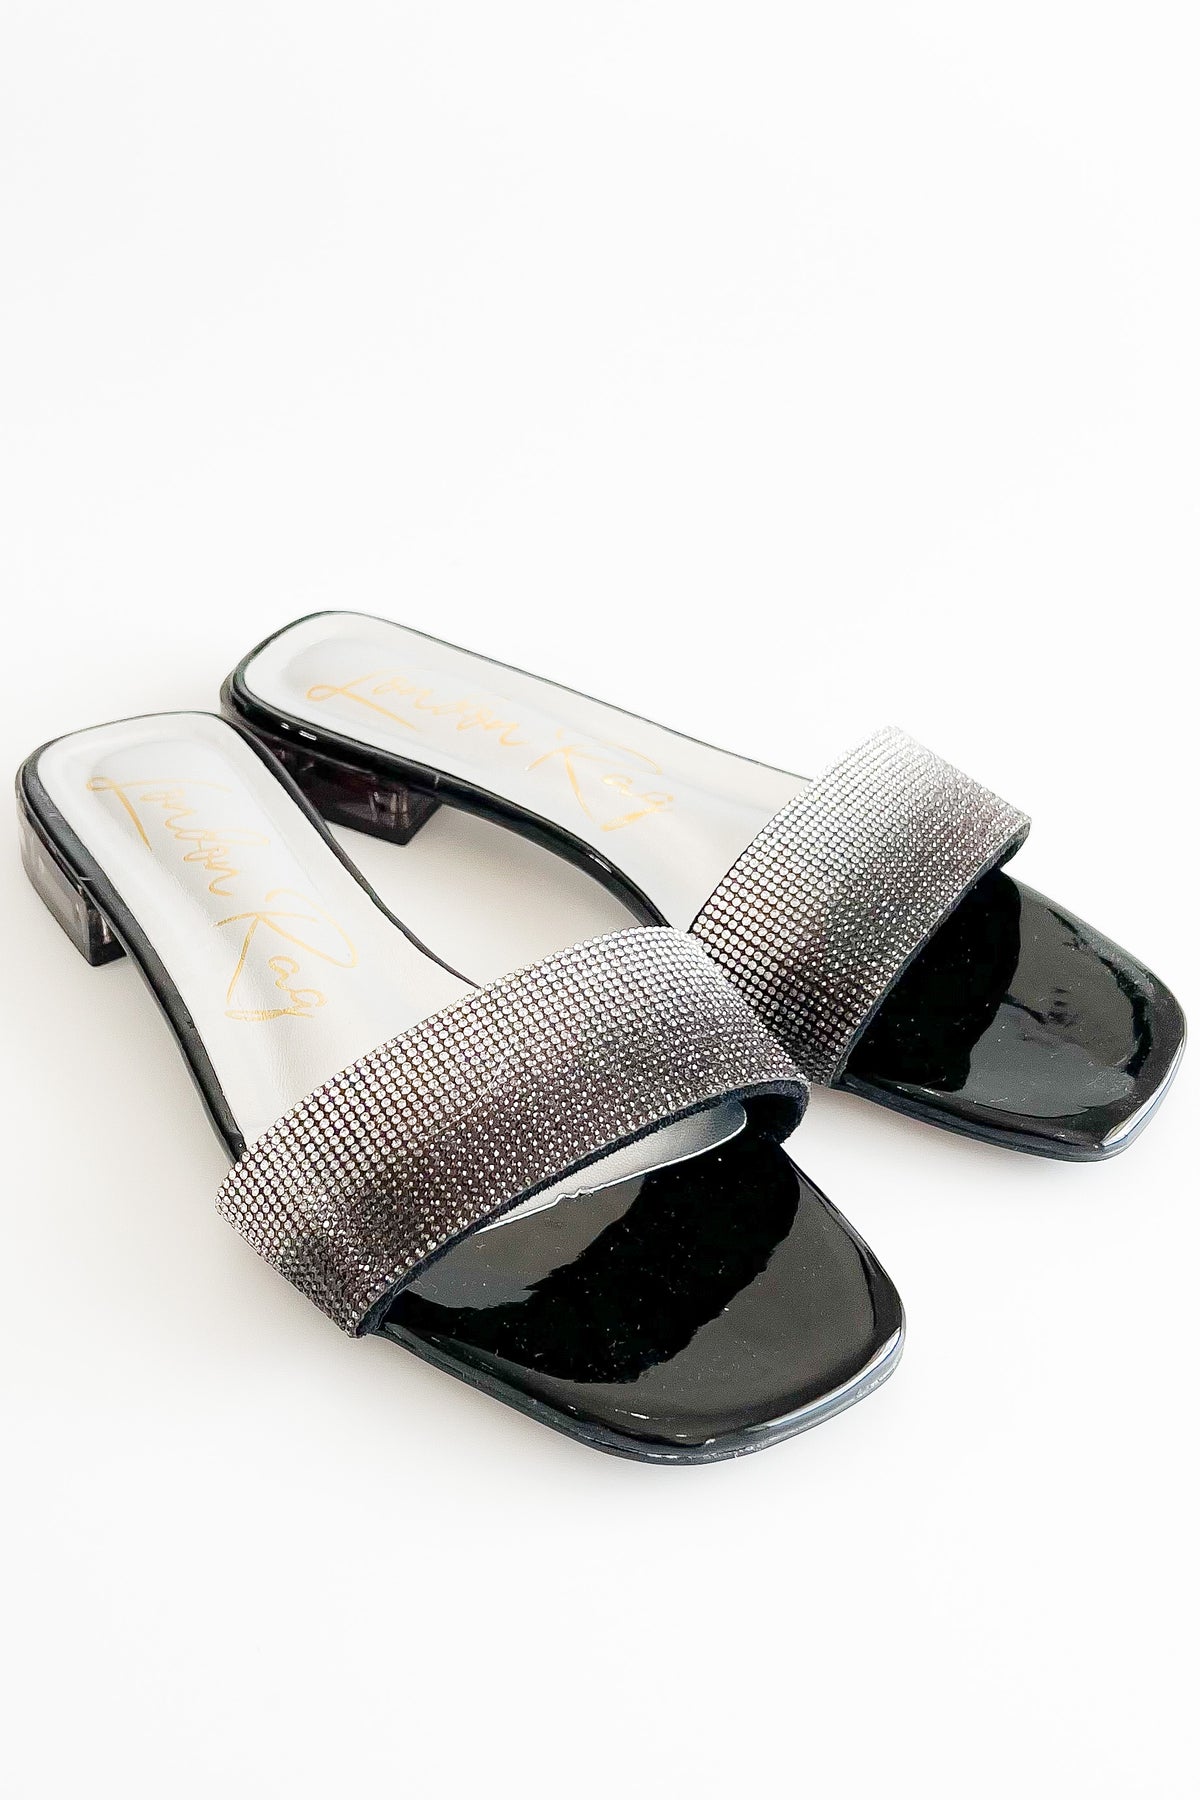 Top Flirt Rhinestone Slip On Sandals - Black-250 Shoes-RagCompany-Coastal Bloom Boutique, find the trendiest versions of the popular styles and looks Located in Indialantic, FL